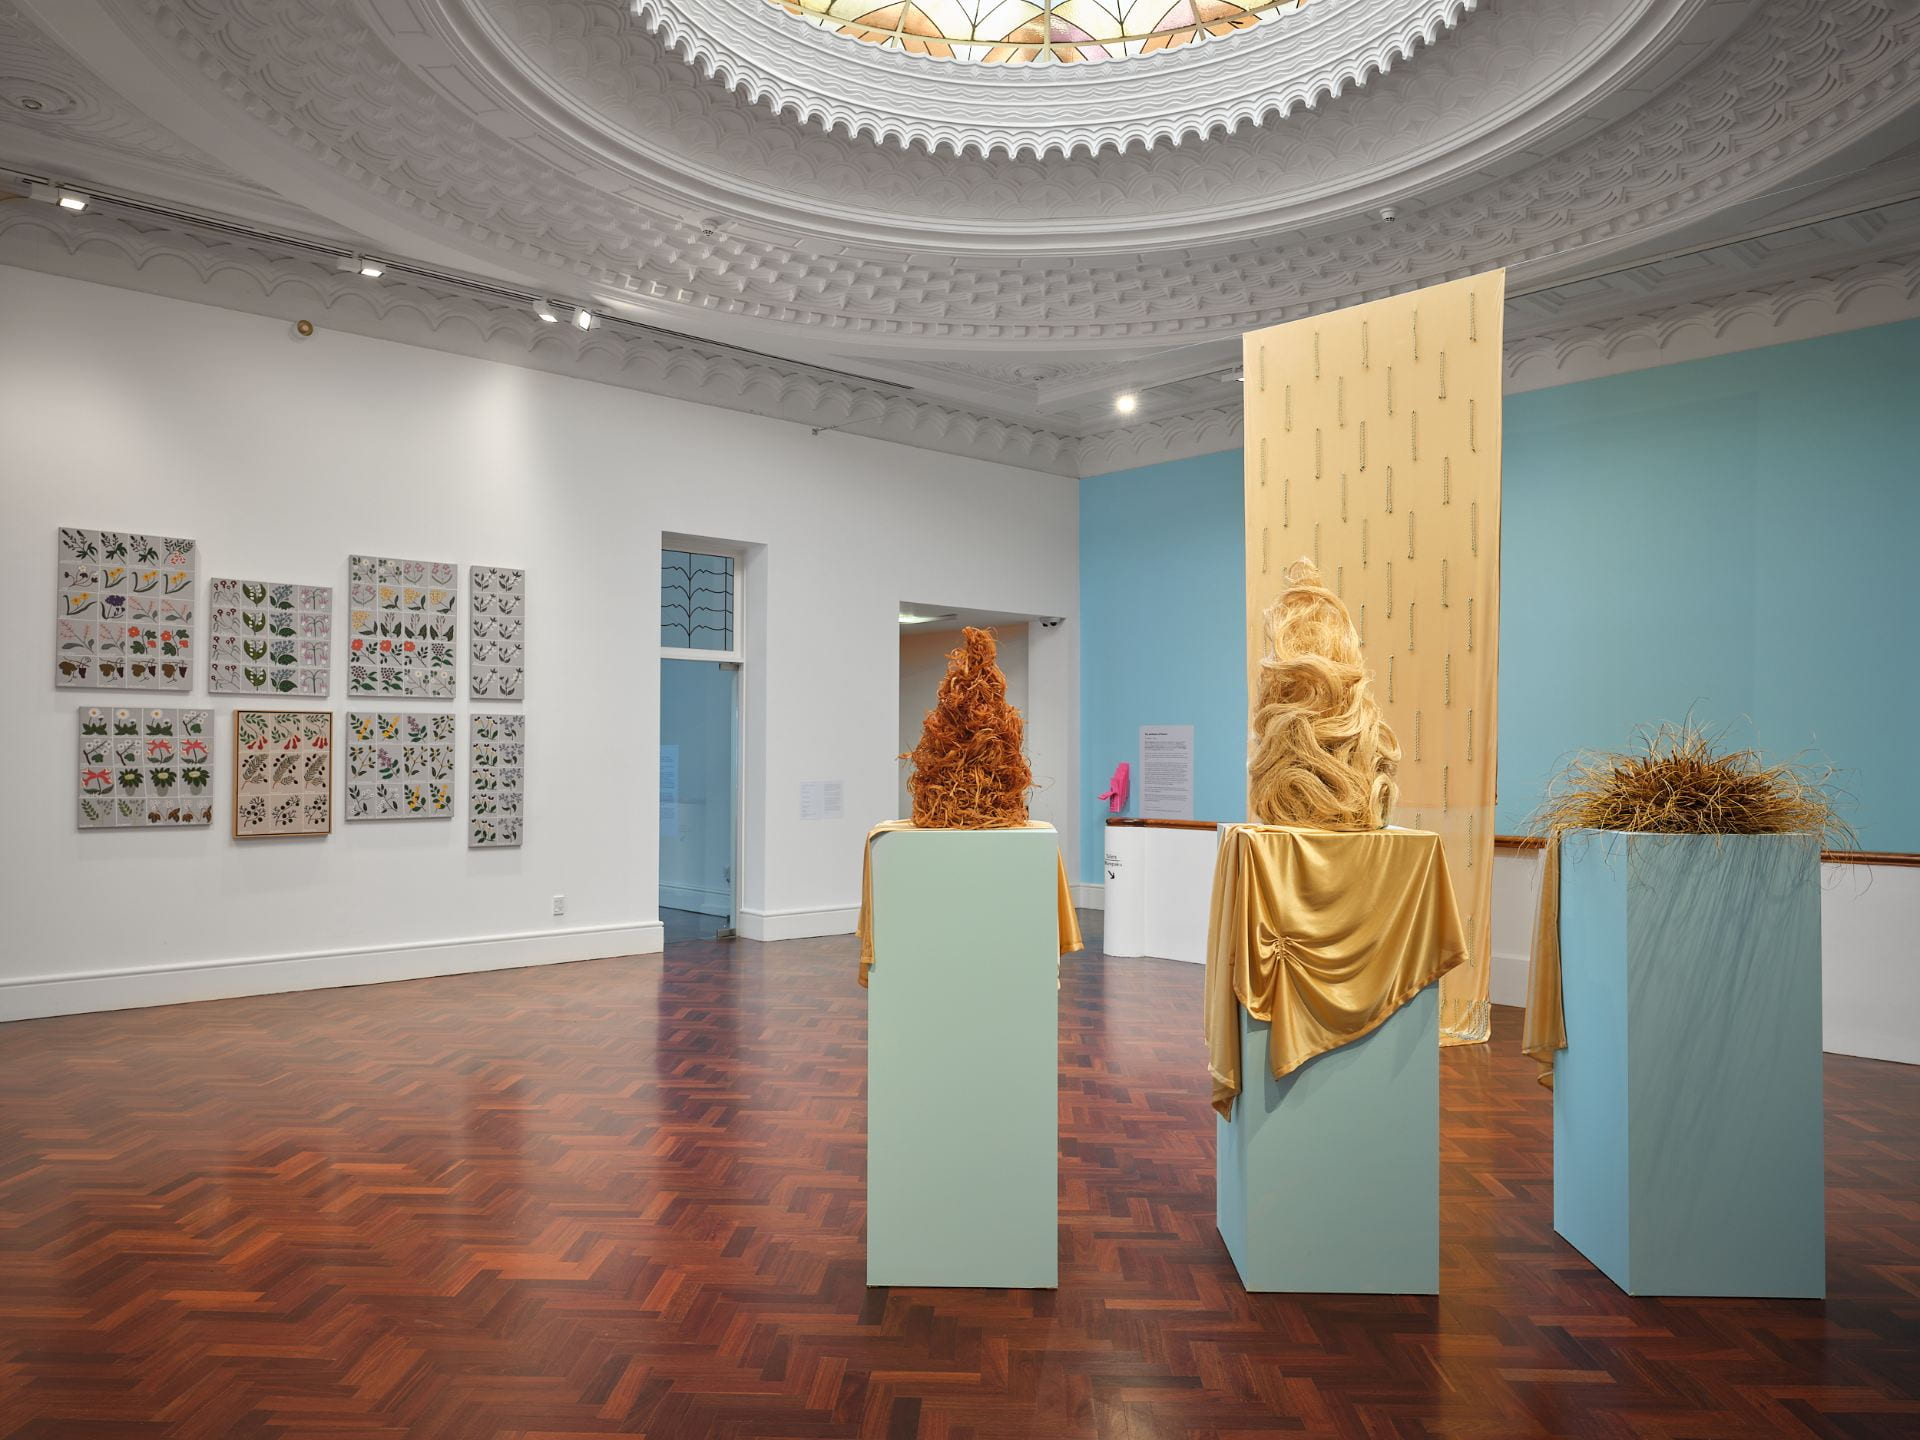 Three tall wigs made of plant fibres are arranged on three pale blue plinths, with golden fabric draped over each. In the background are a series of flower paintings on the left, and a long golden cloak hanging from the ceiling against a pale blue wall on the right.